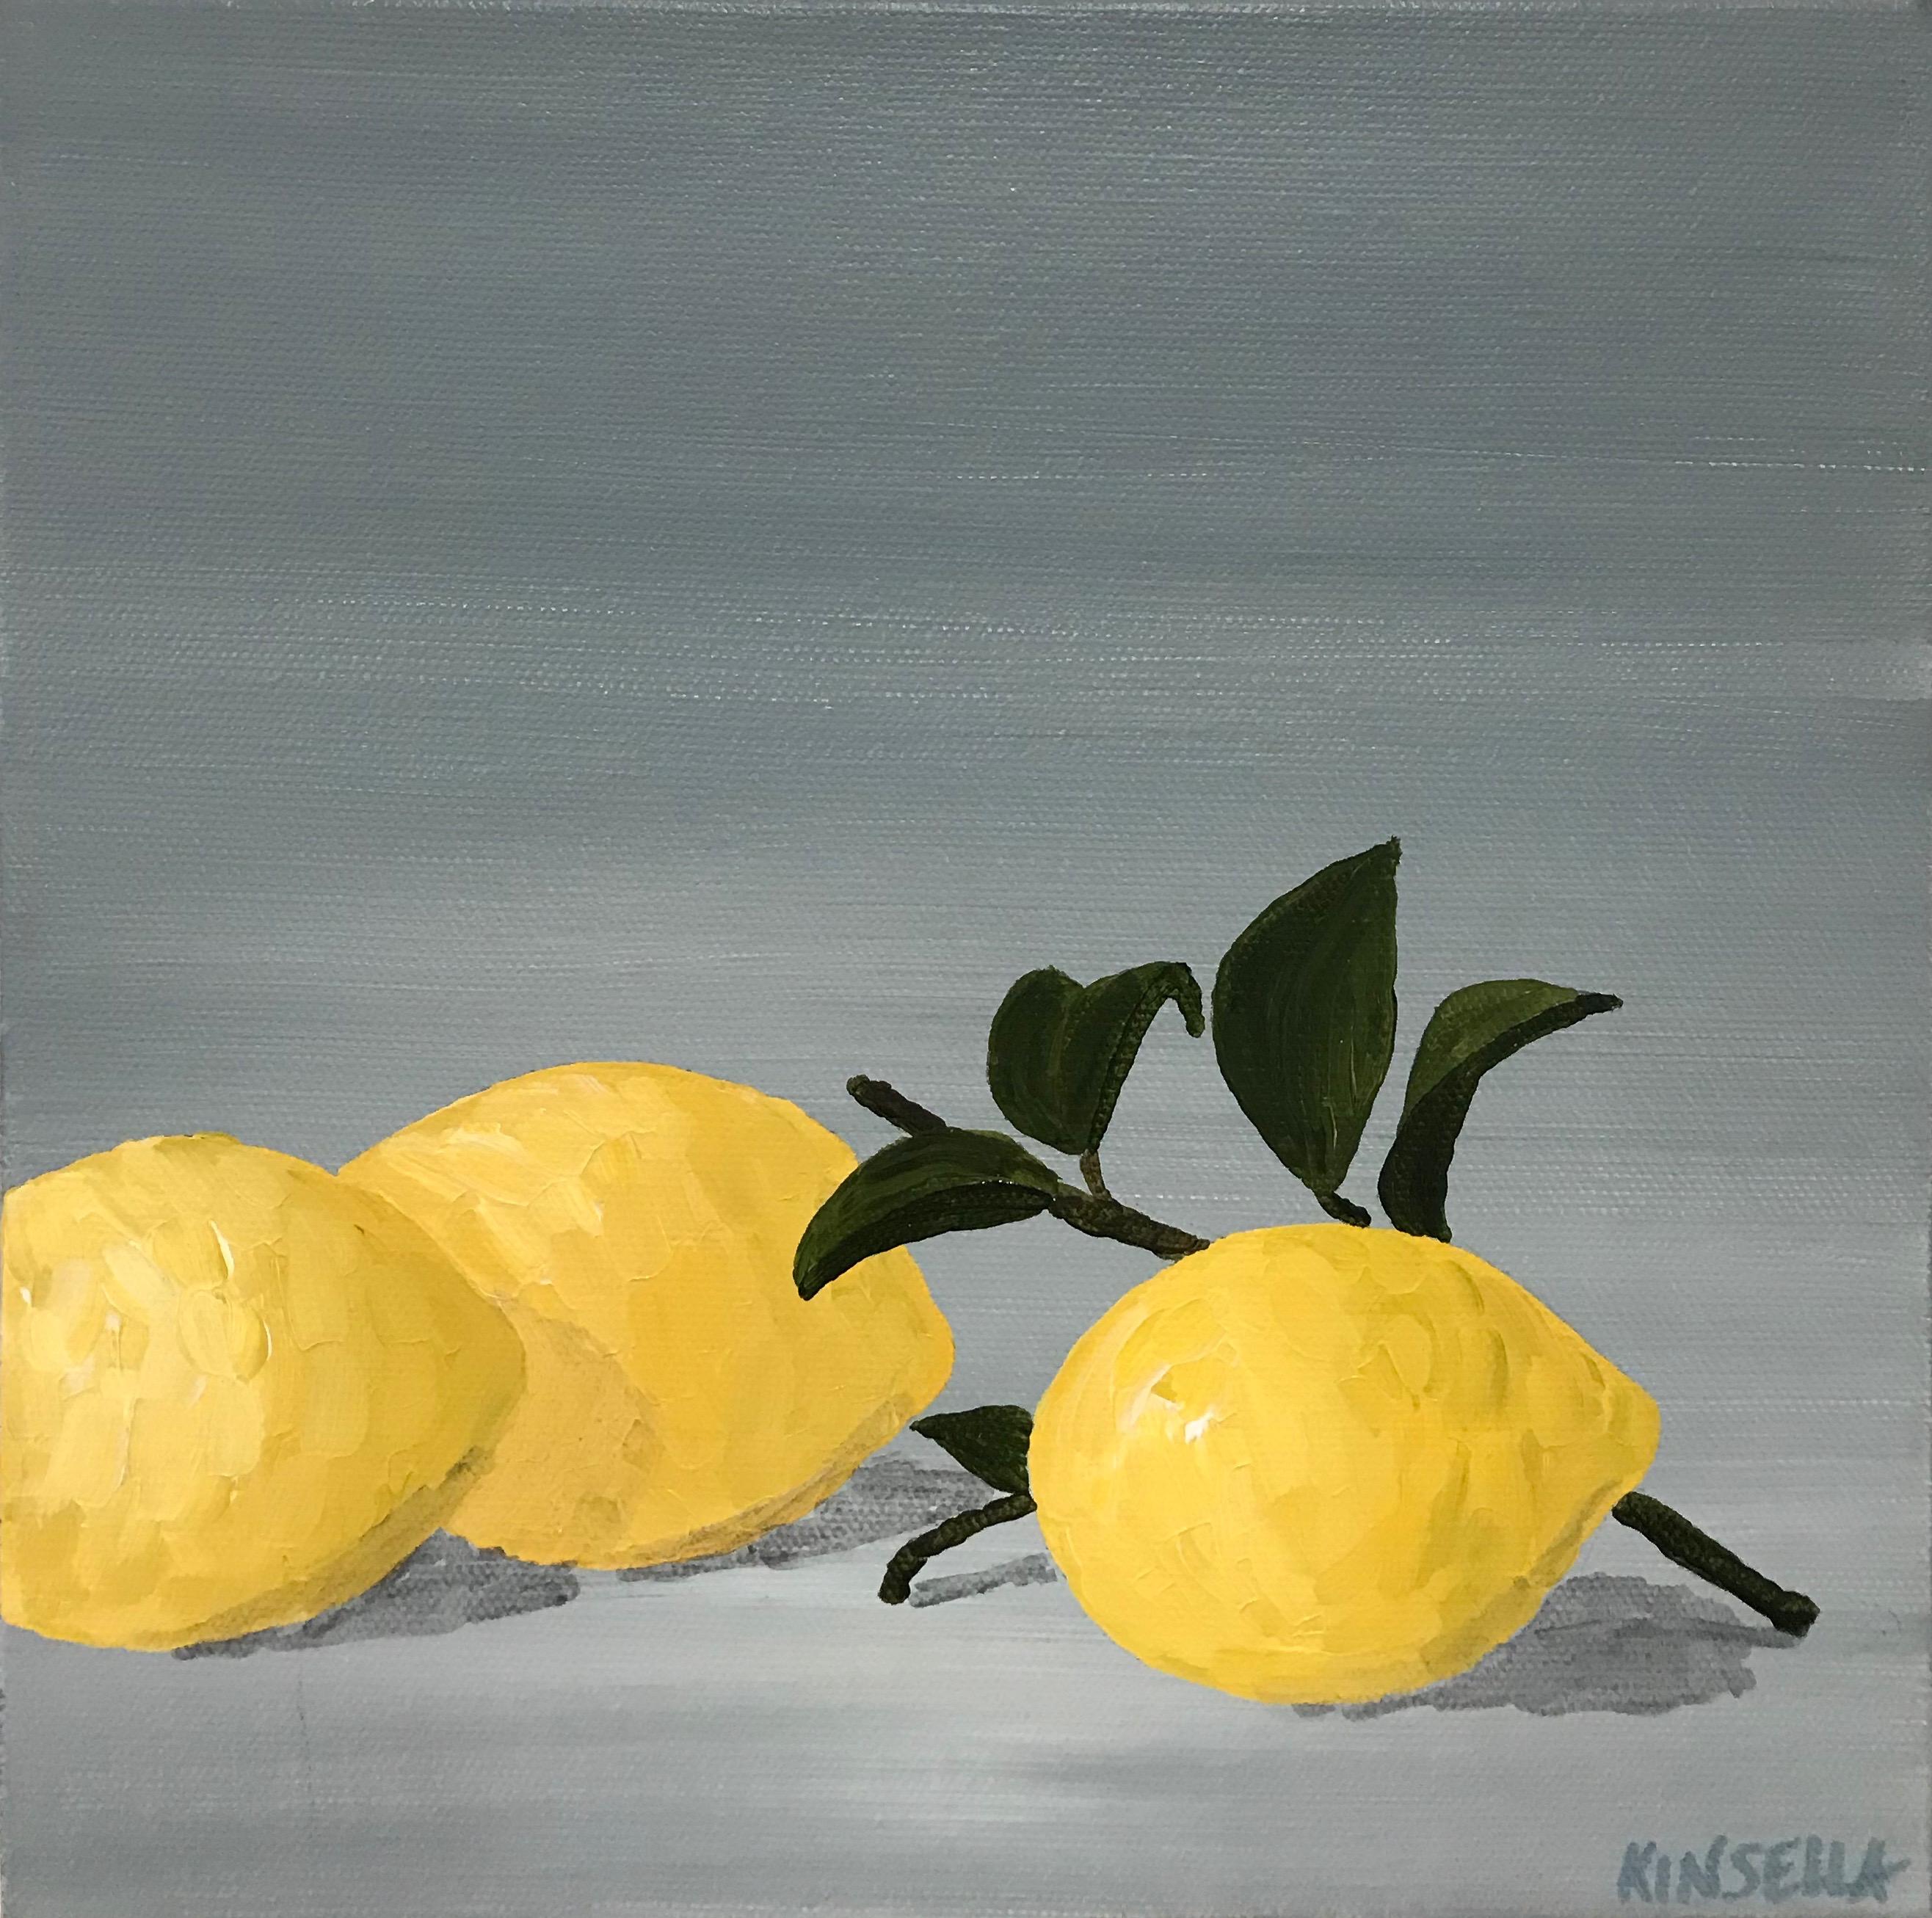 'Lemons I' is a small contemporary still-life acrylic on canvas painting created by American artist Susan Kinsella in 2018. Featuring a striking palette made of yellow and dark green standing out beautifully on a soft grey background, the painting